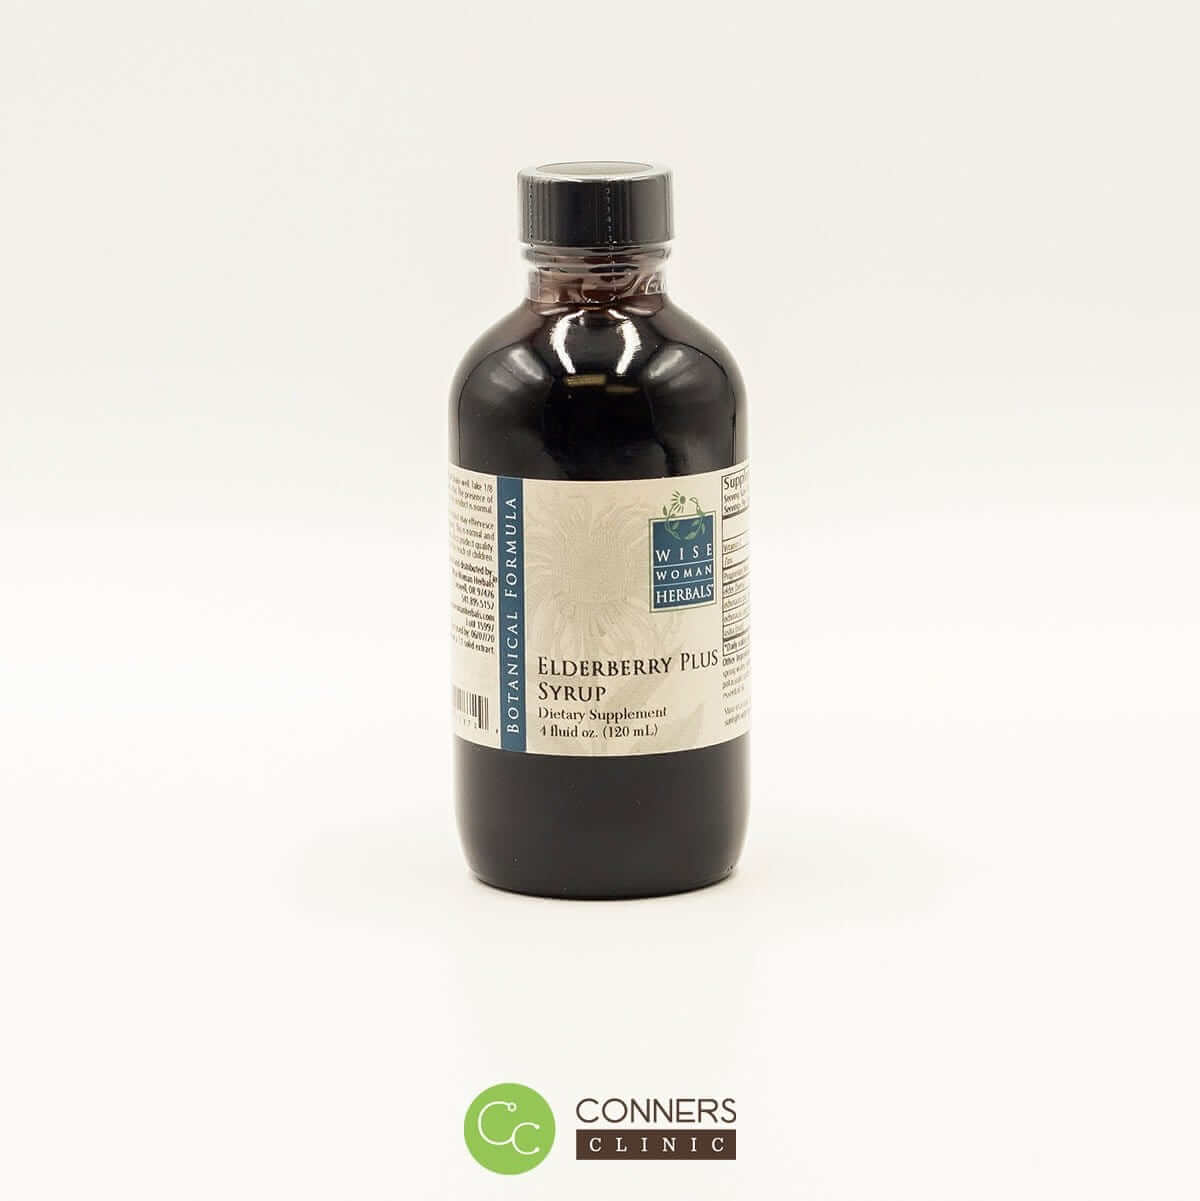 Elderberry Plus Syrup Natural Partners Supplement - Conners Clinic